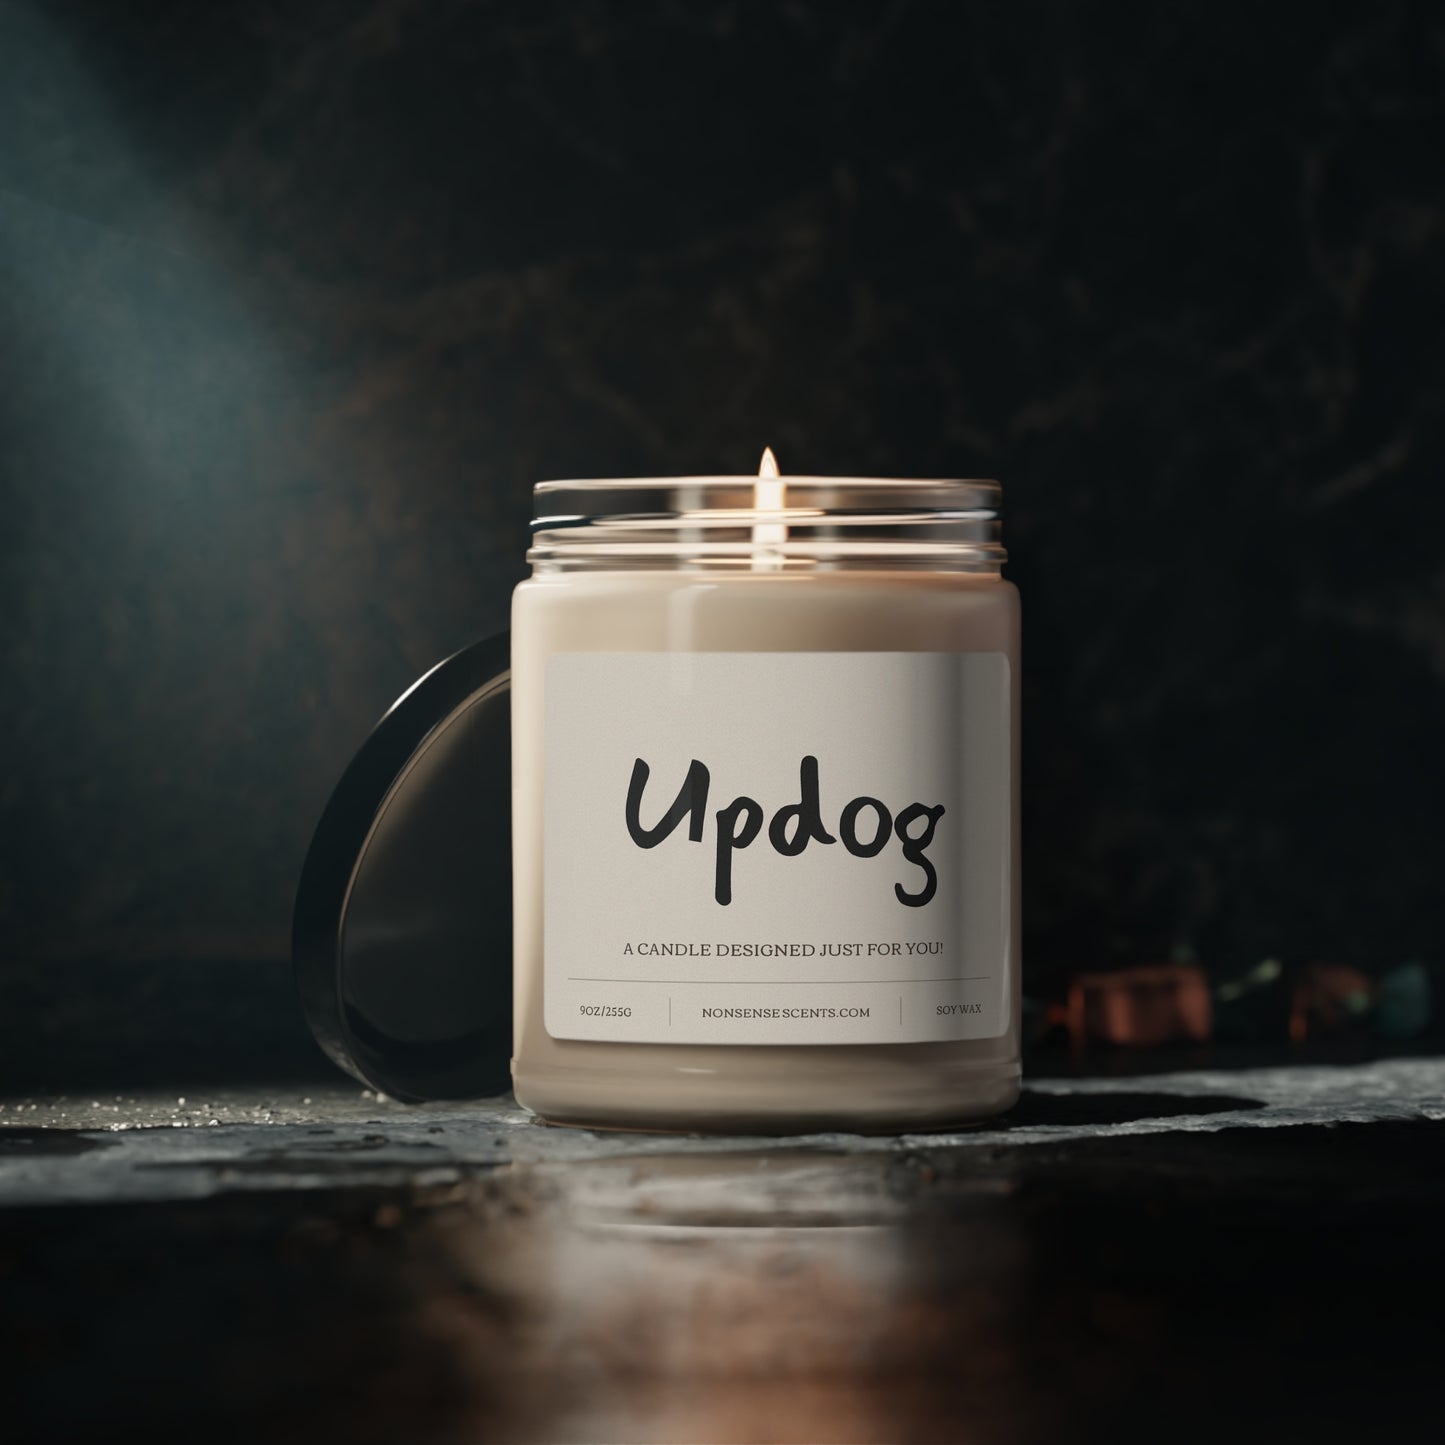 "Updog" Scented Candle